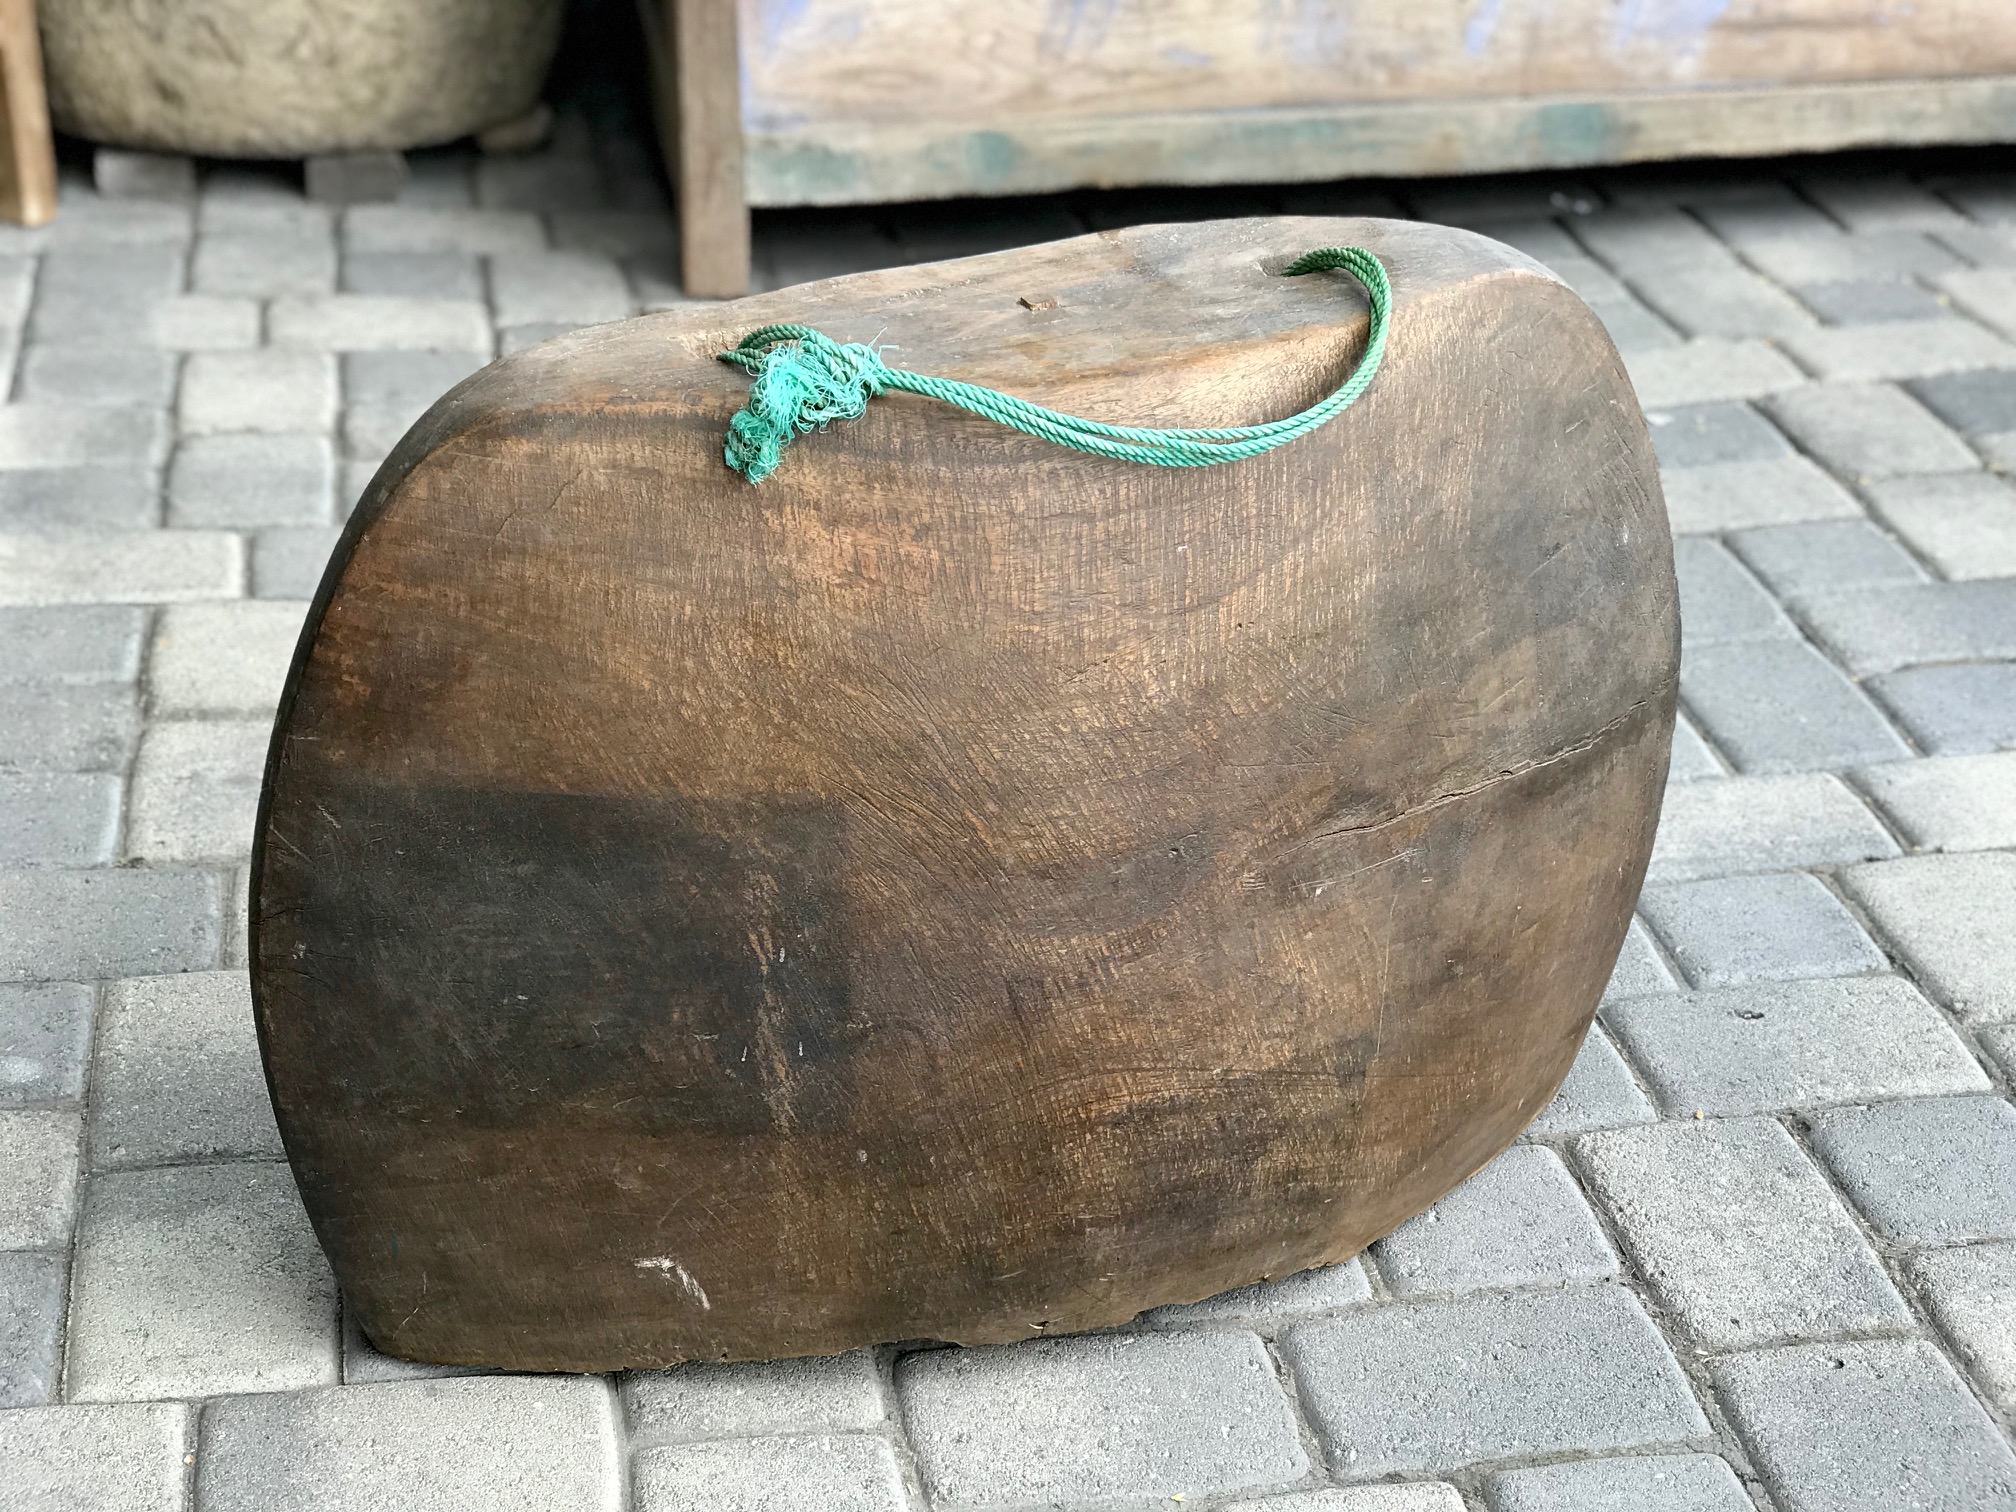 Musical Instrument, hand carved, single piece, teak bell, Indonesia, Early 20th c, vintage, clapper missing, 22" x 33" x 12", $425., thedavidalancollection.com , solana beach, ca